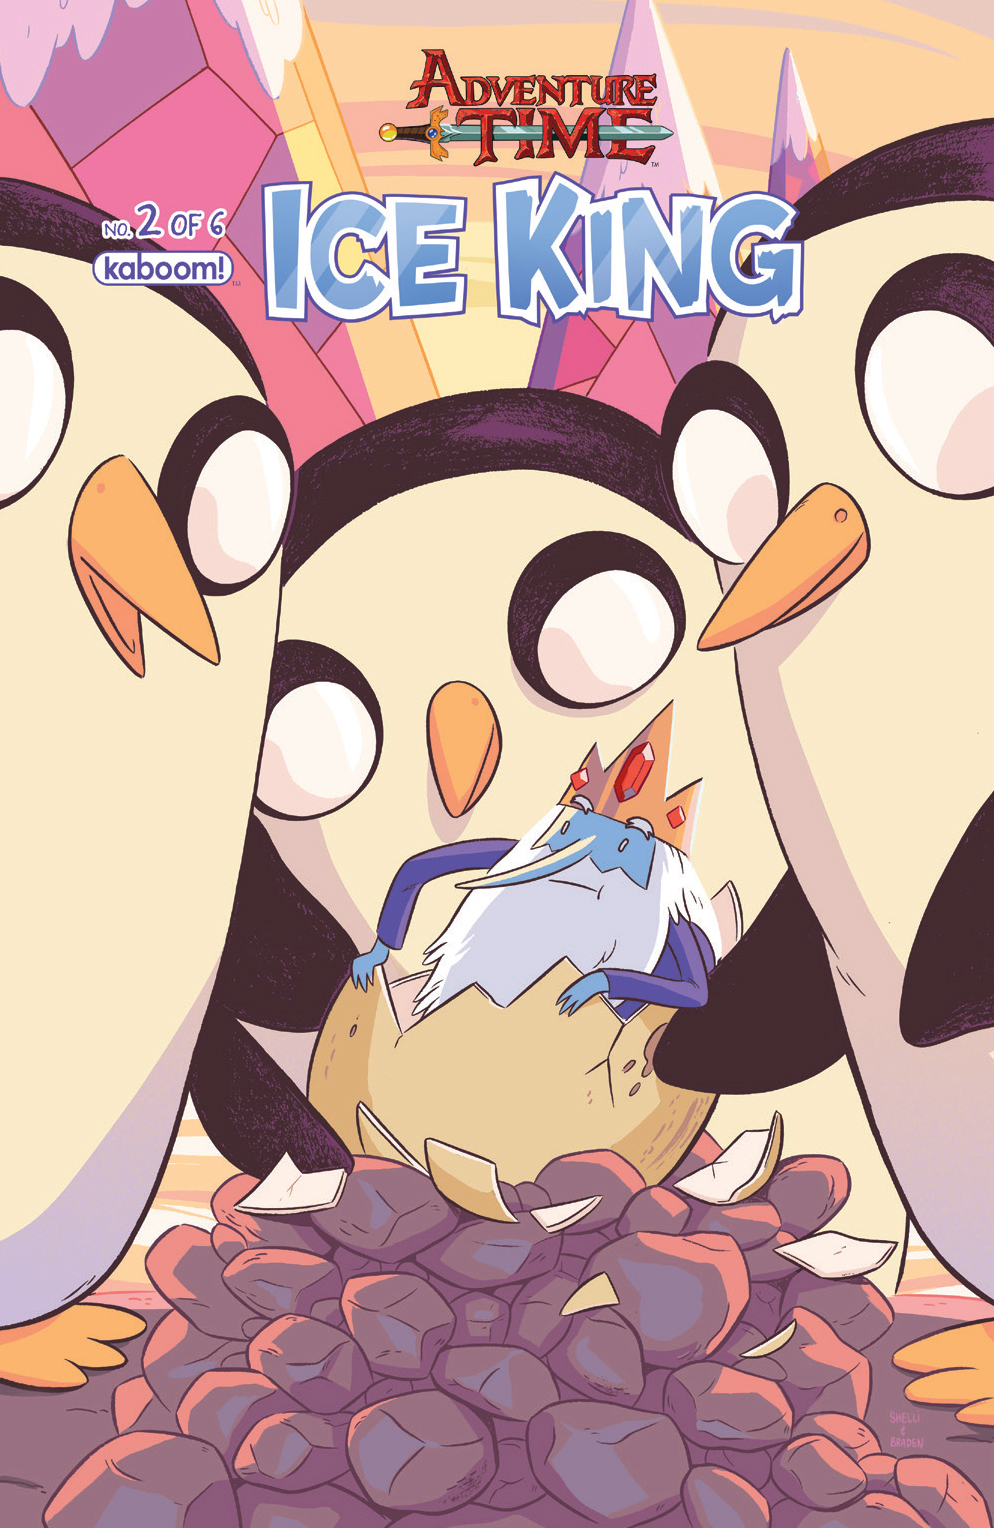 ADVENTURE TIME ICE KING #2